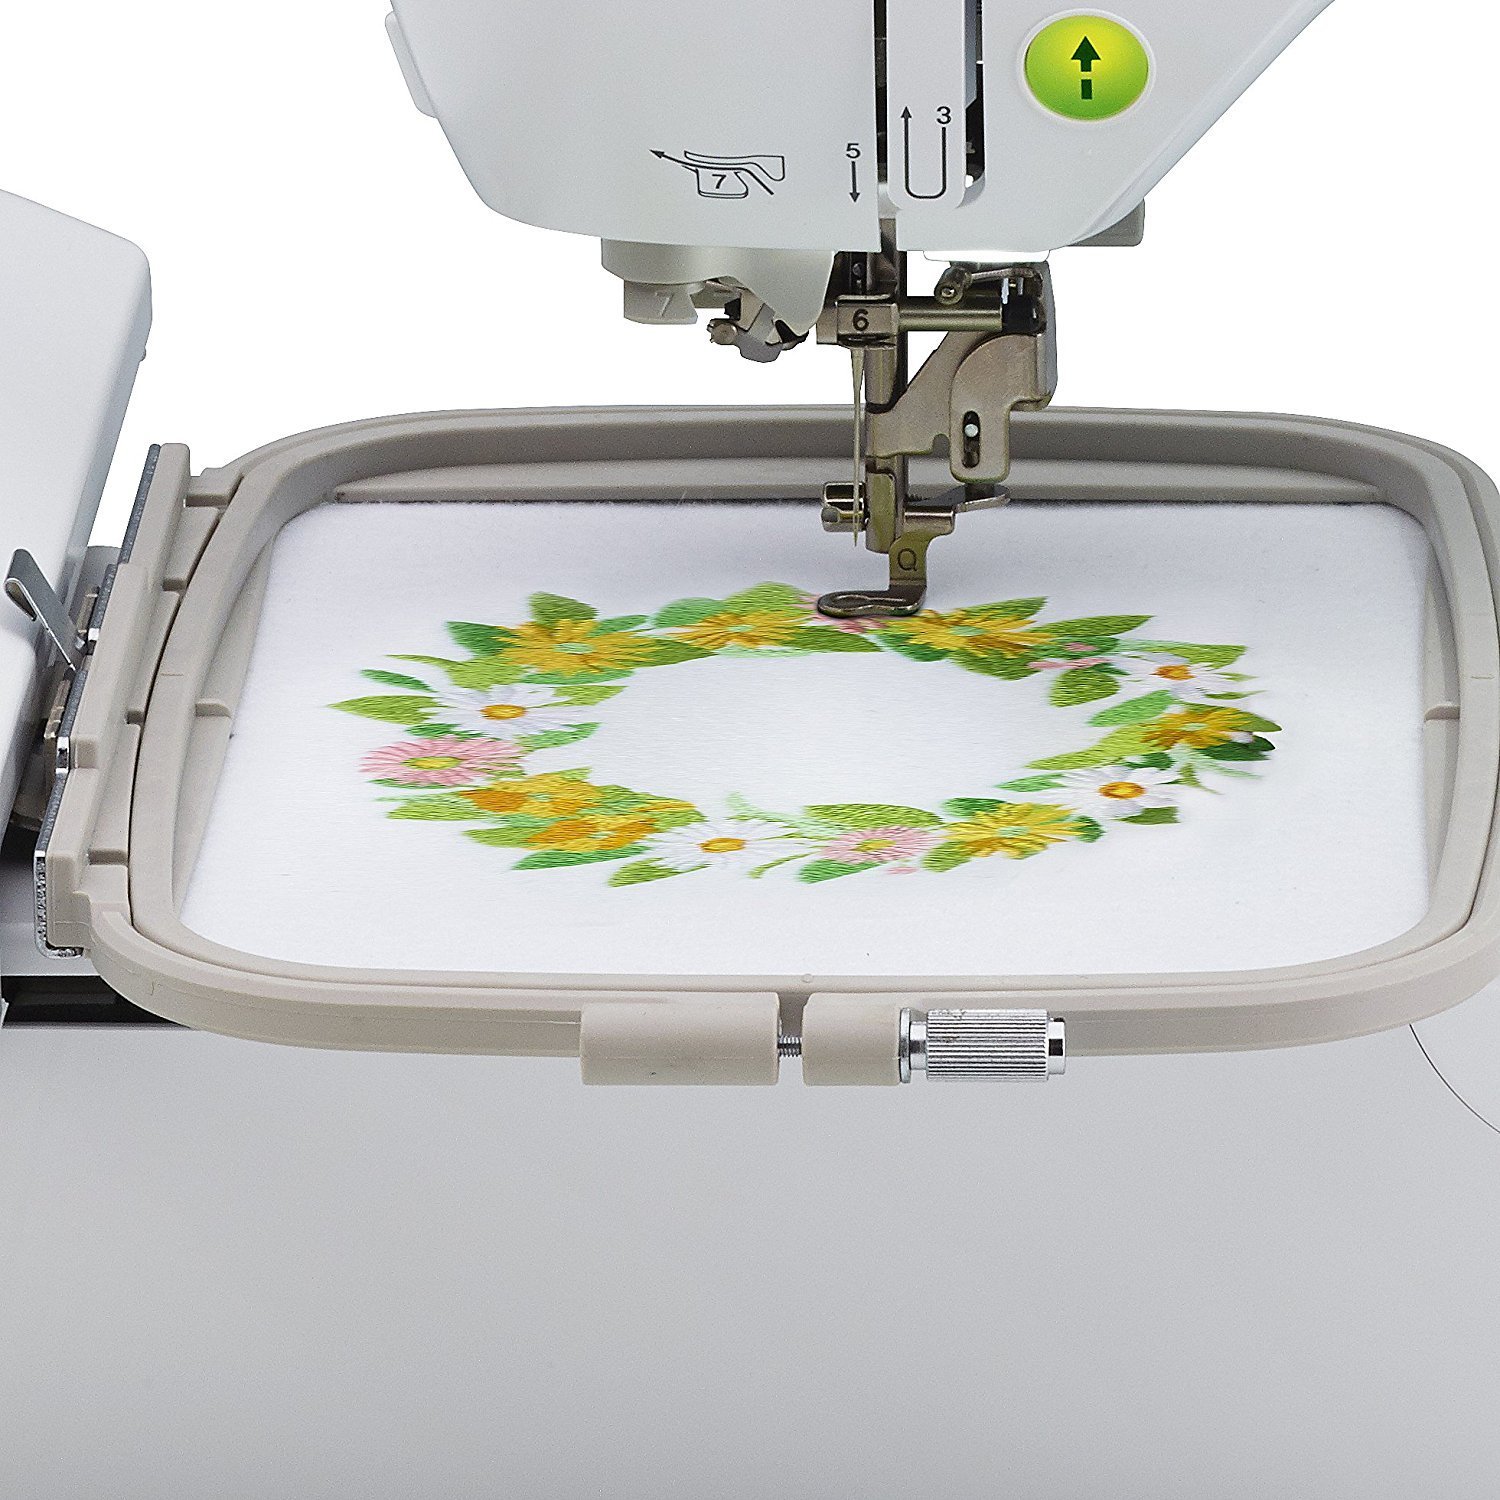 Brother SE1900, Combination Sewing and Embroidery Machine with 5x7  Embroidery Field and Large Color Touch LCD screen - On Sale - Bed Bath &  Beyond - 21425975